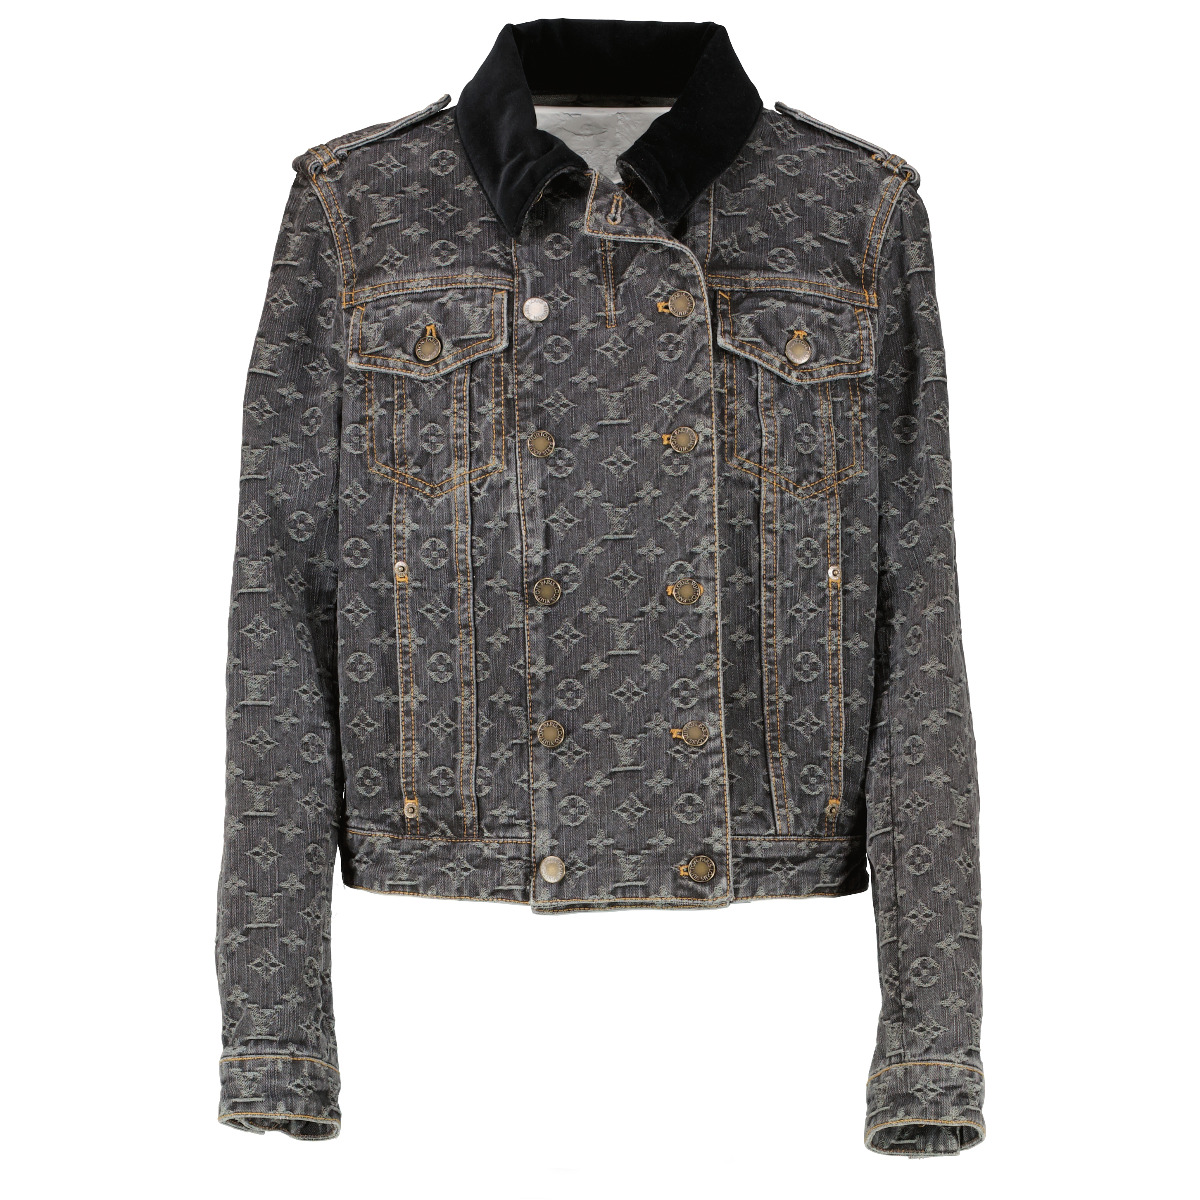 Louis Vuitton, Jackets & Coats, Louis Vuitton Denim Jacket I Am Looking  To Purchase One If Anyone See